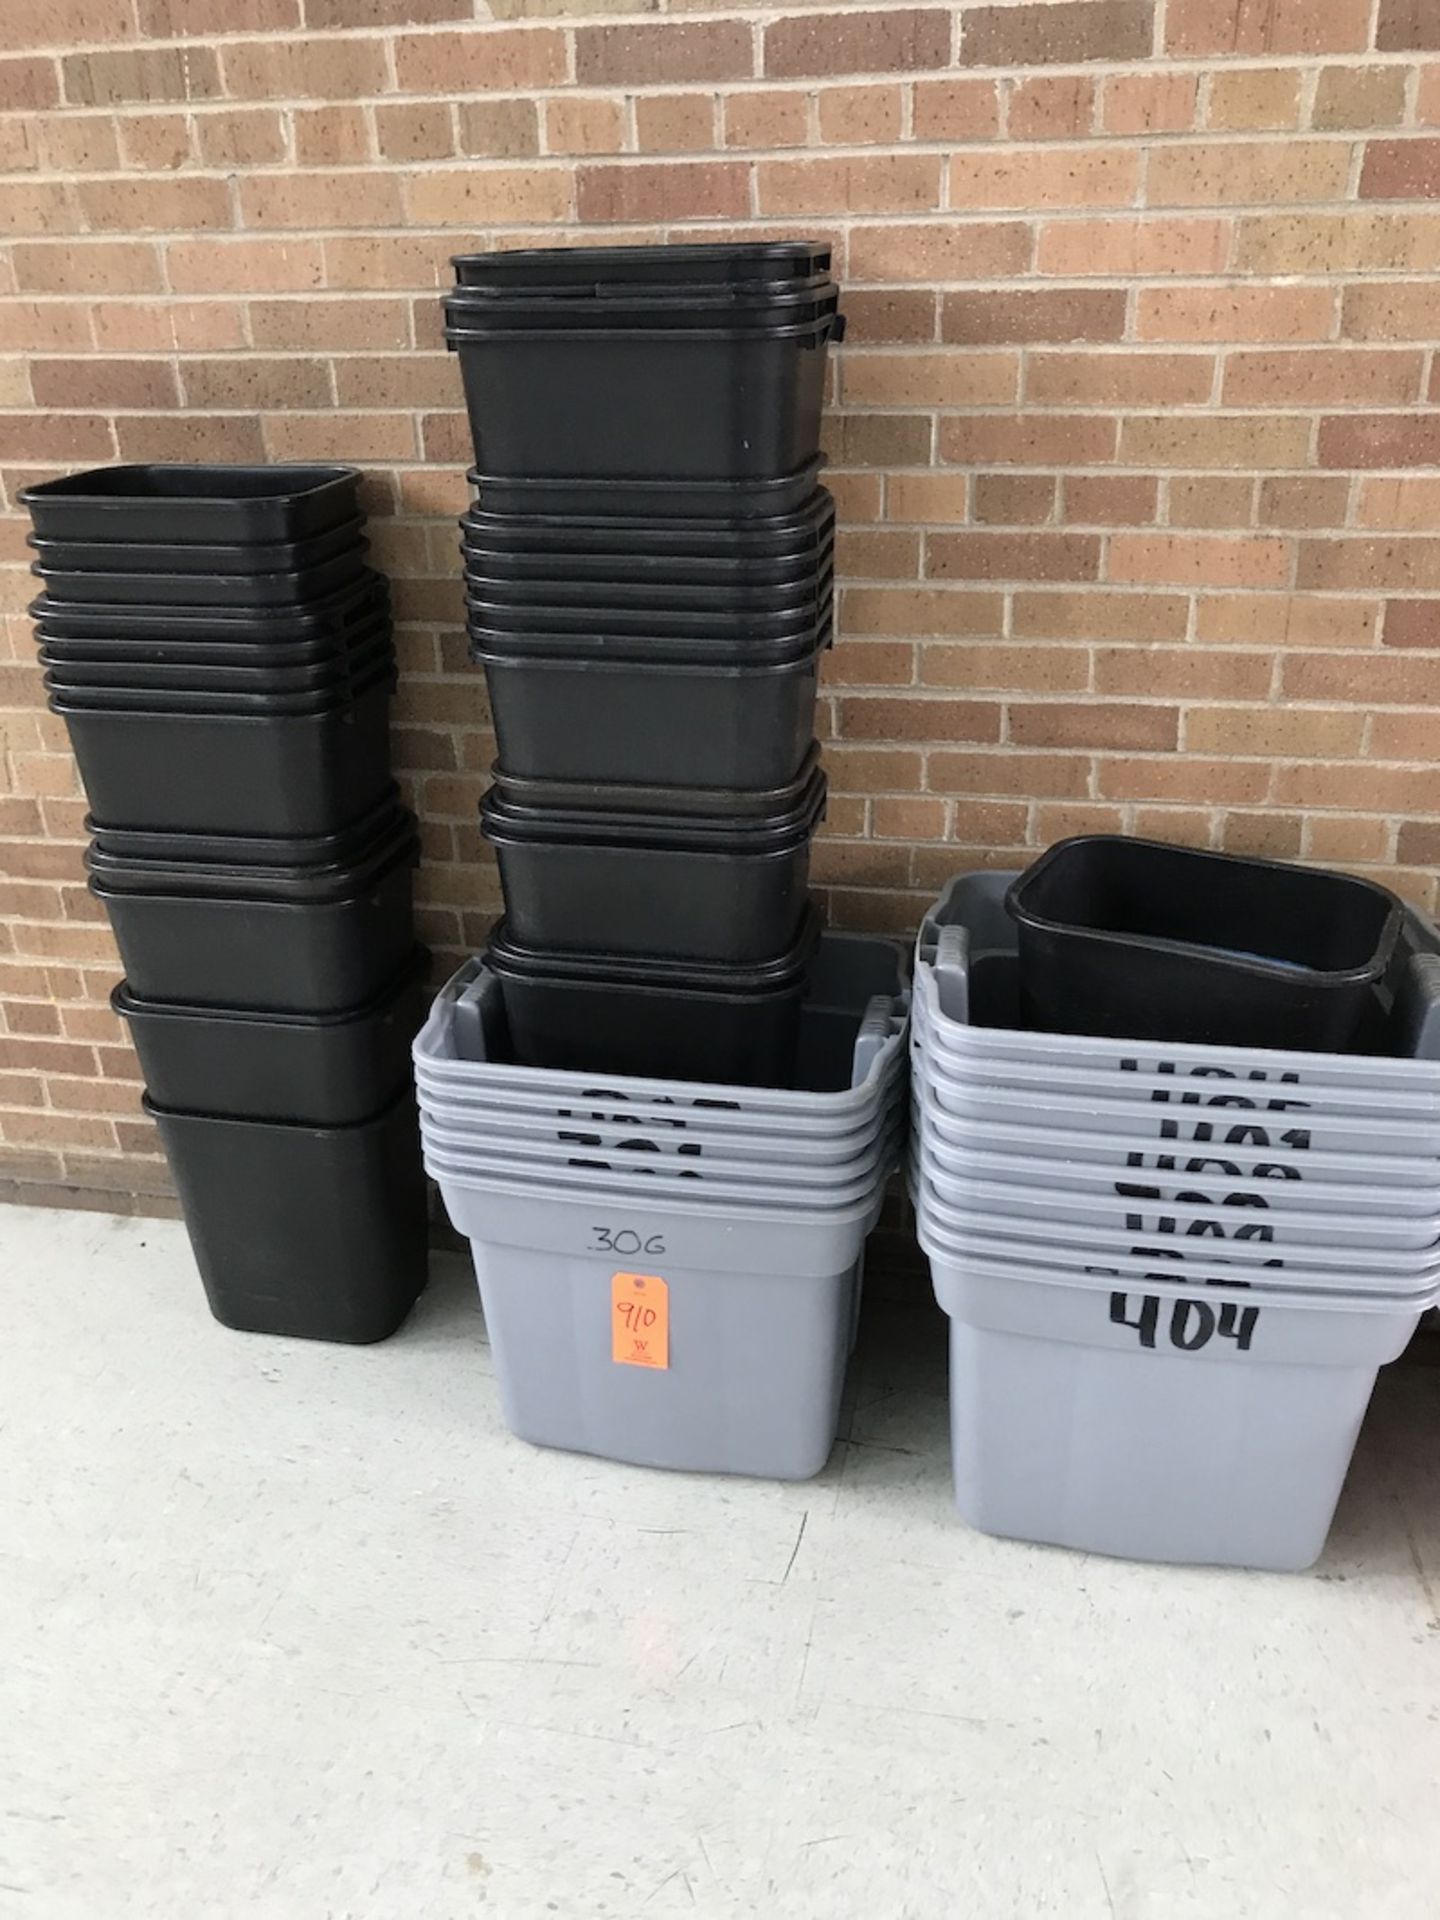 Lot of Plastic Trash Cans and Misc. Storage Bins (New Gym) - Image 2 of 3